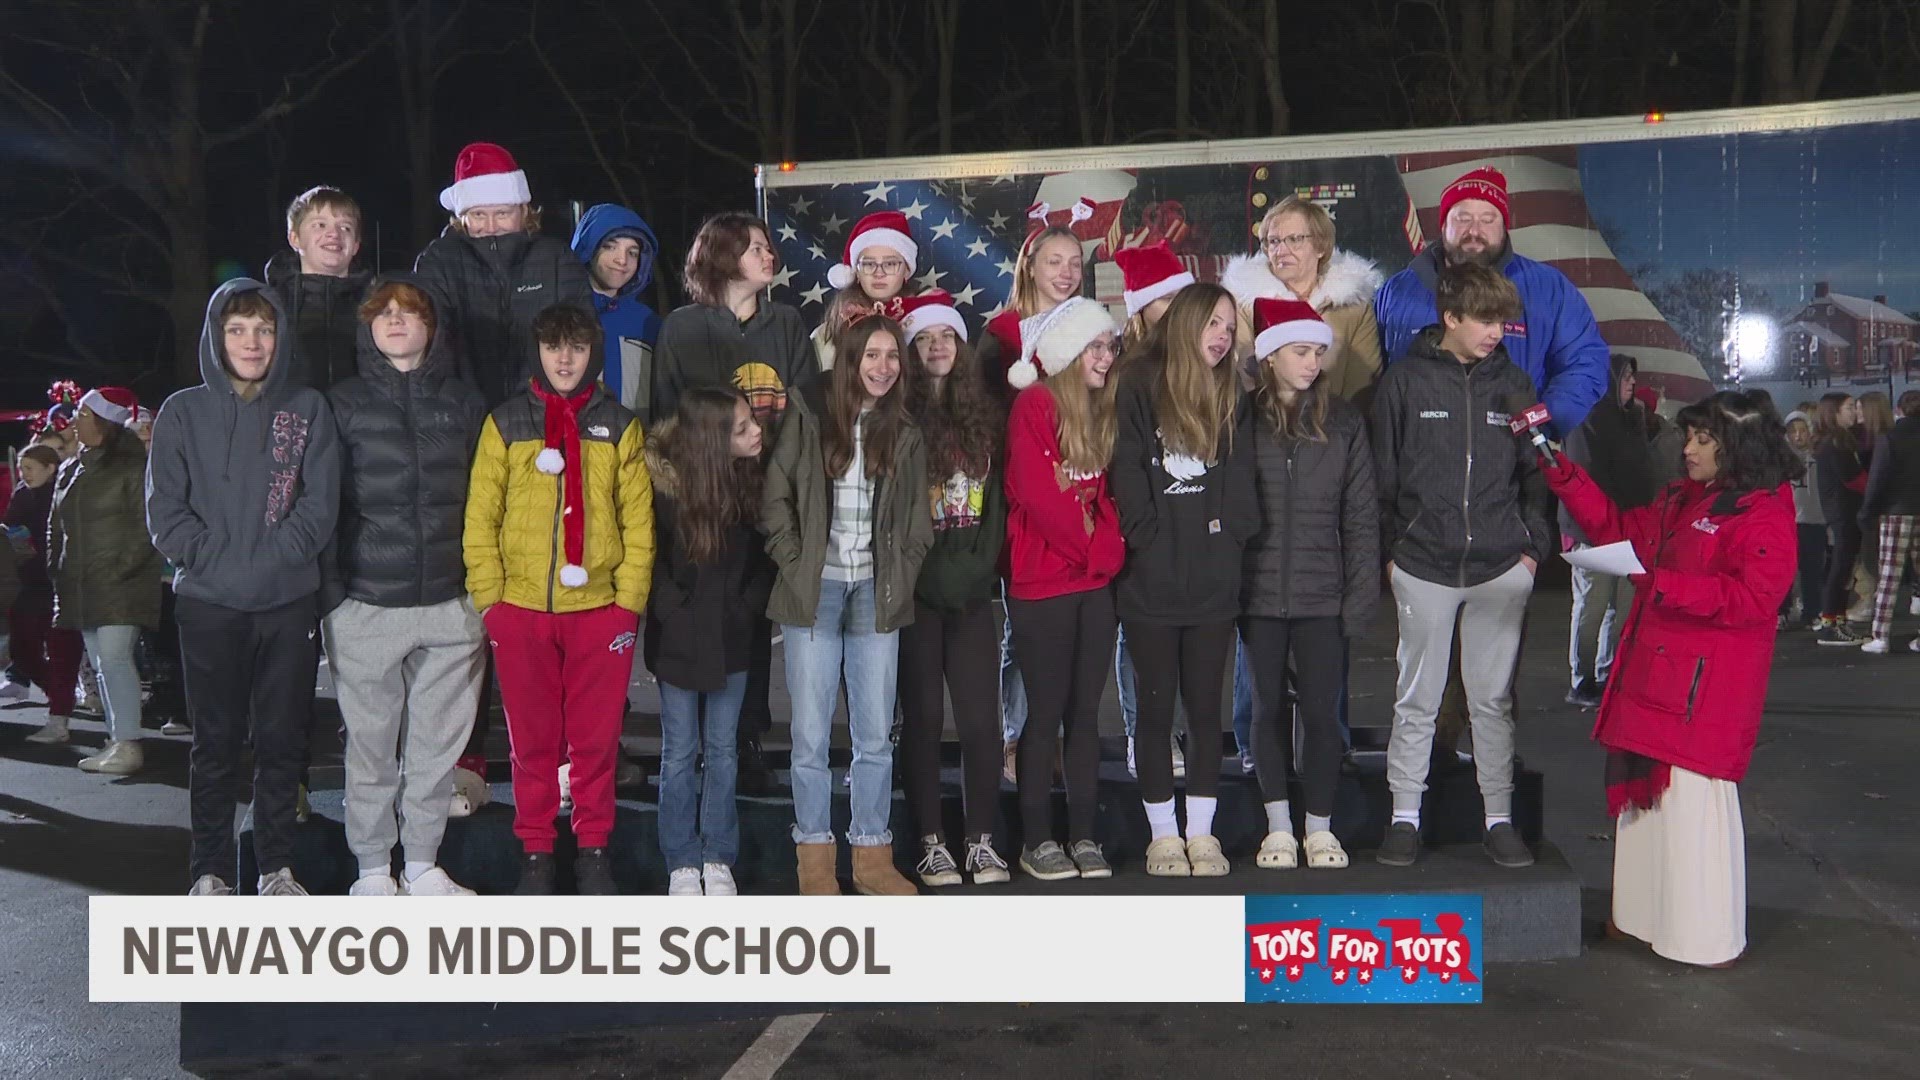 Toys for Tots is receiving thousands of donations thanks to participating schools in the School Spirit Challenge.